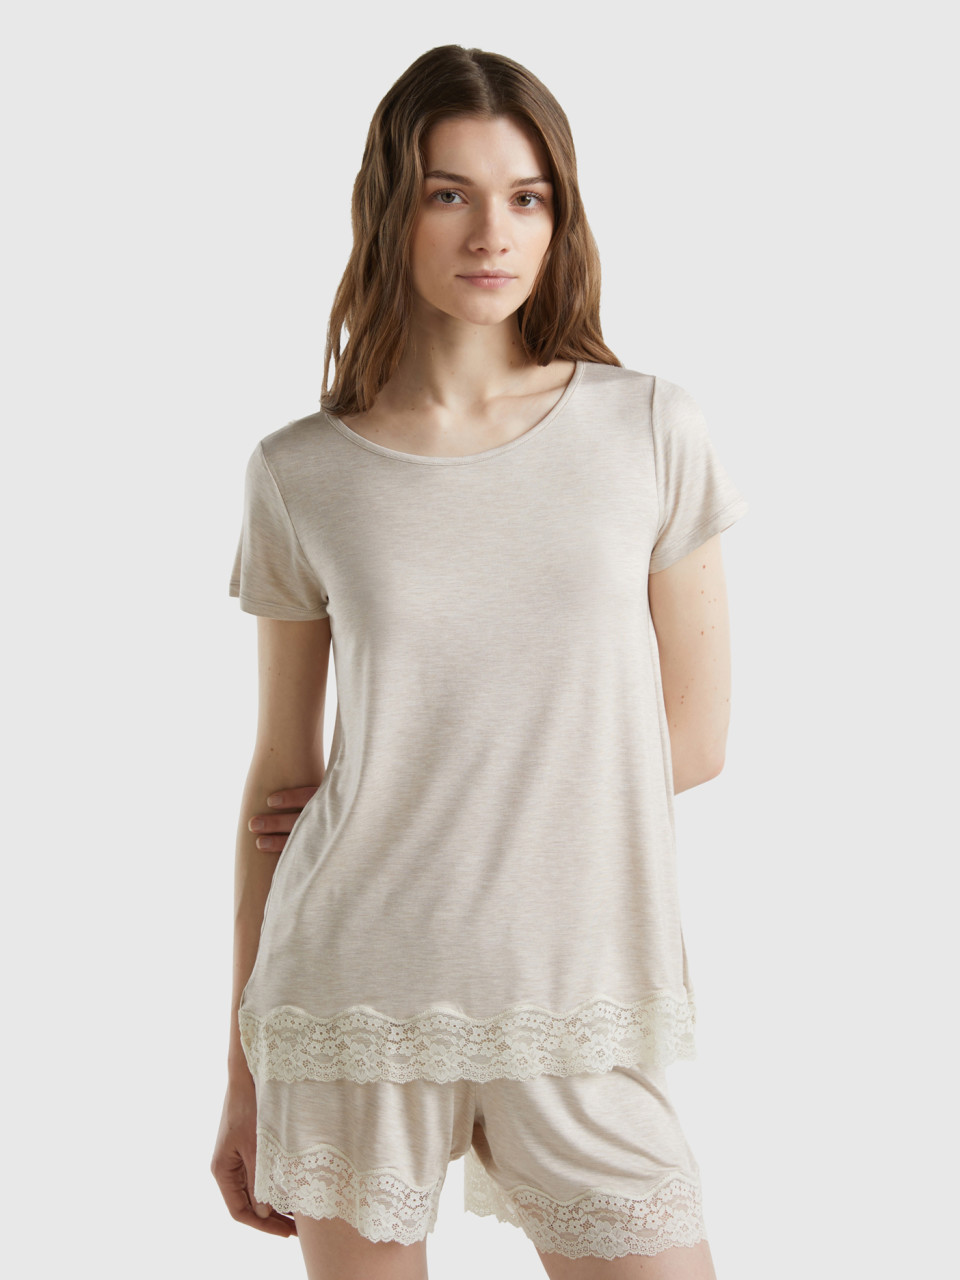 Benetton, Short Sleeve T-shirts With Lace, Beige, Women